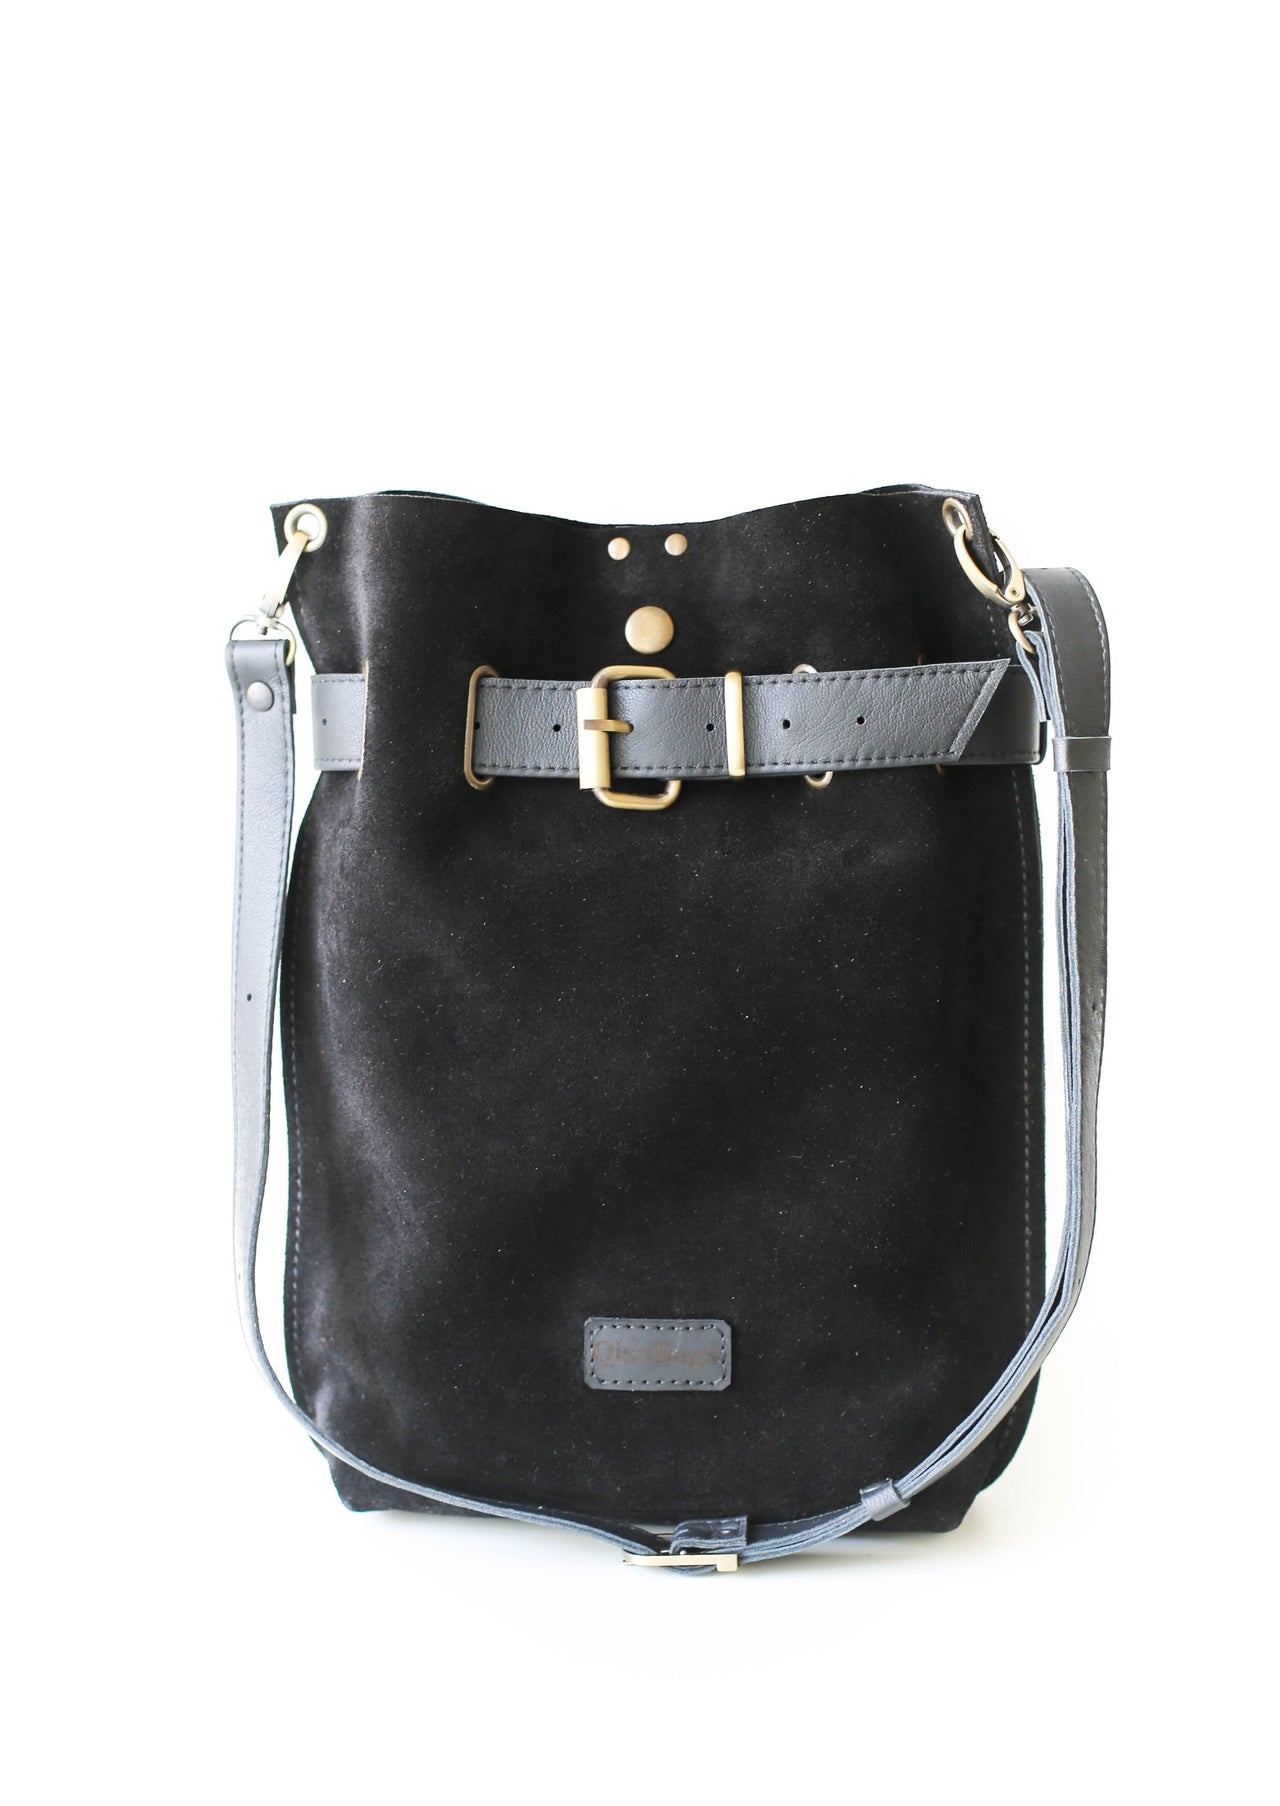 Women's leather bags